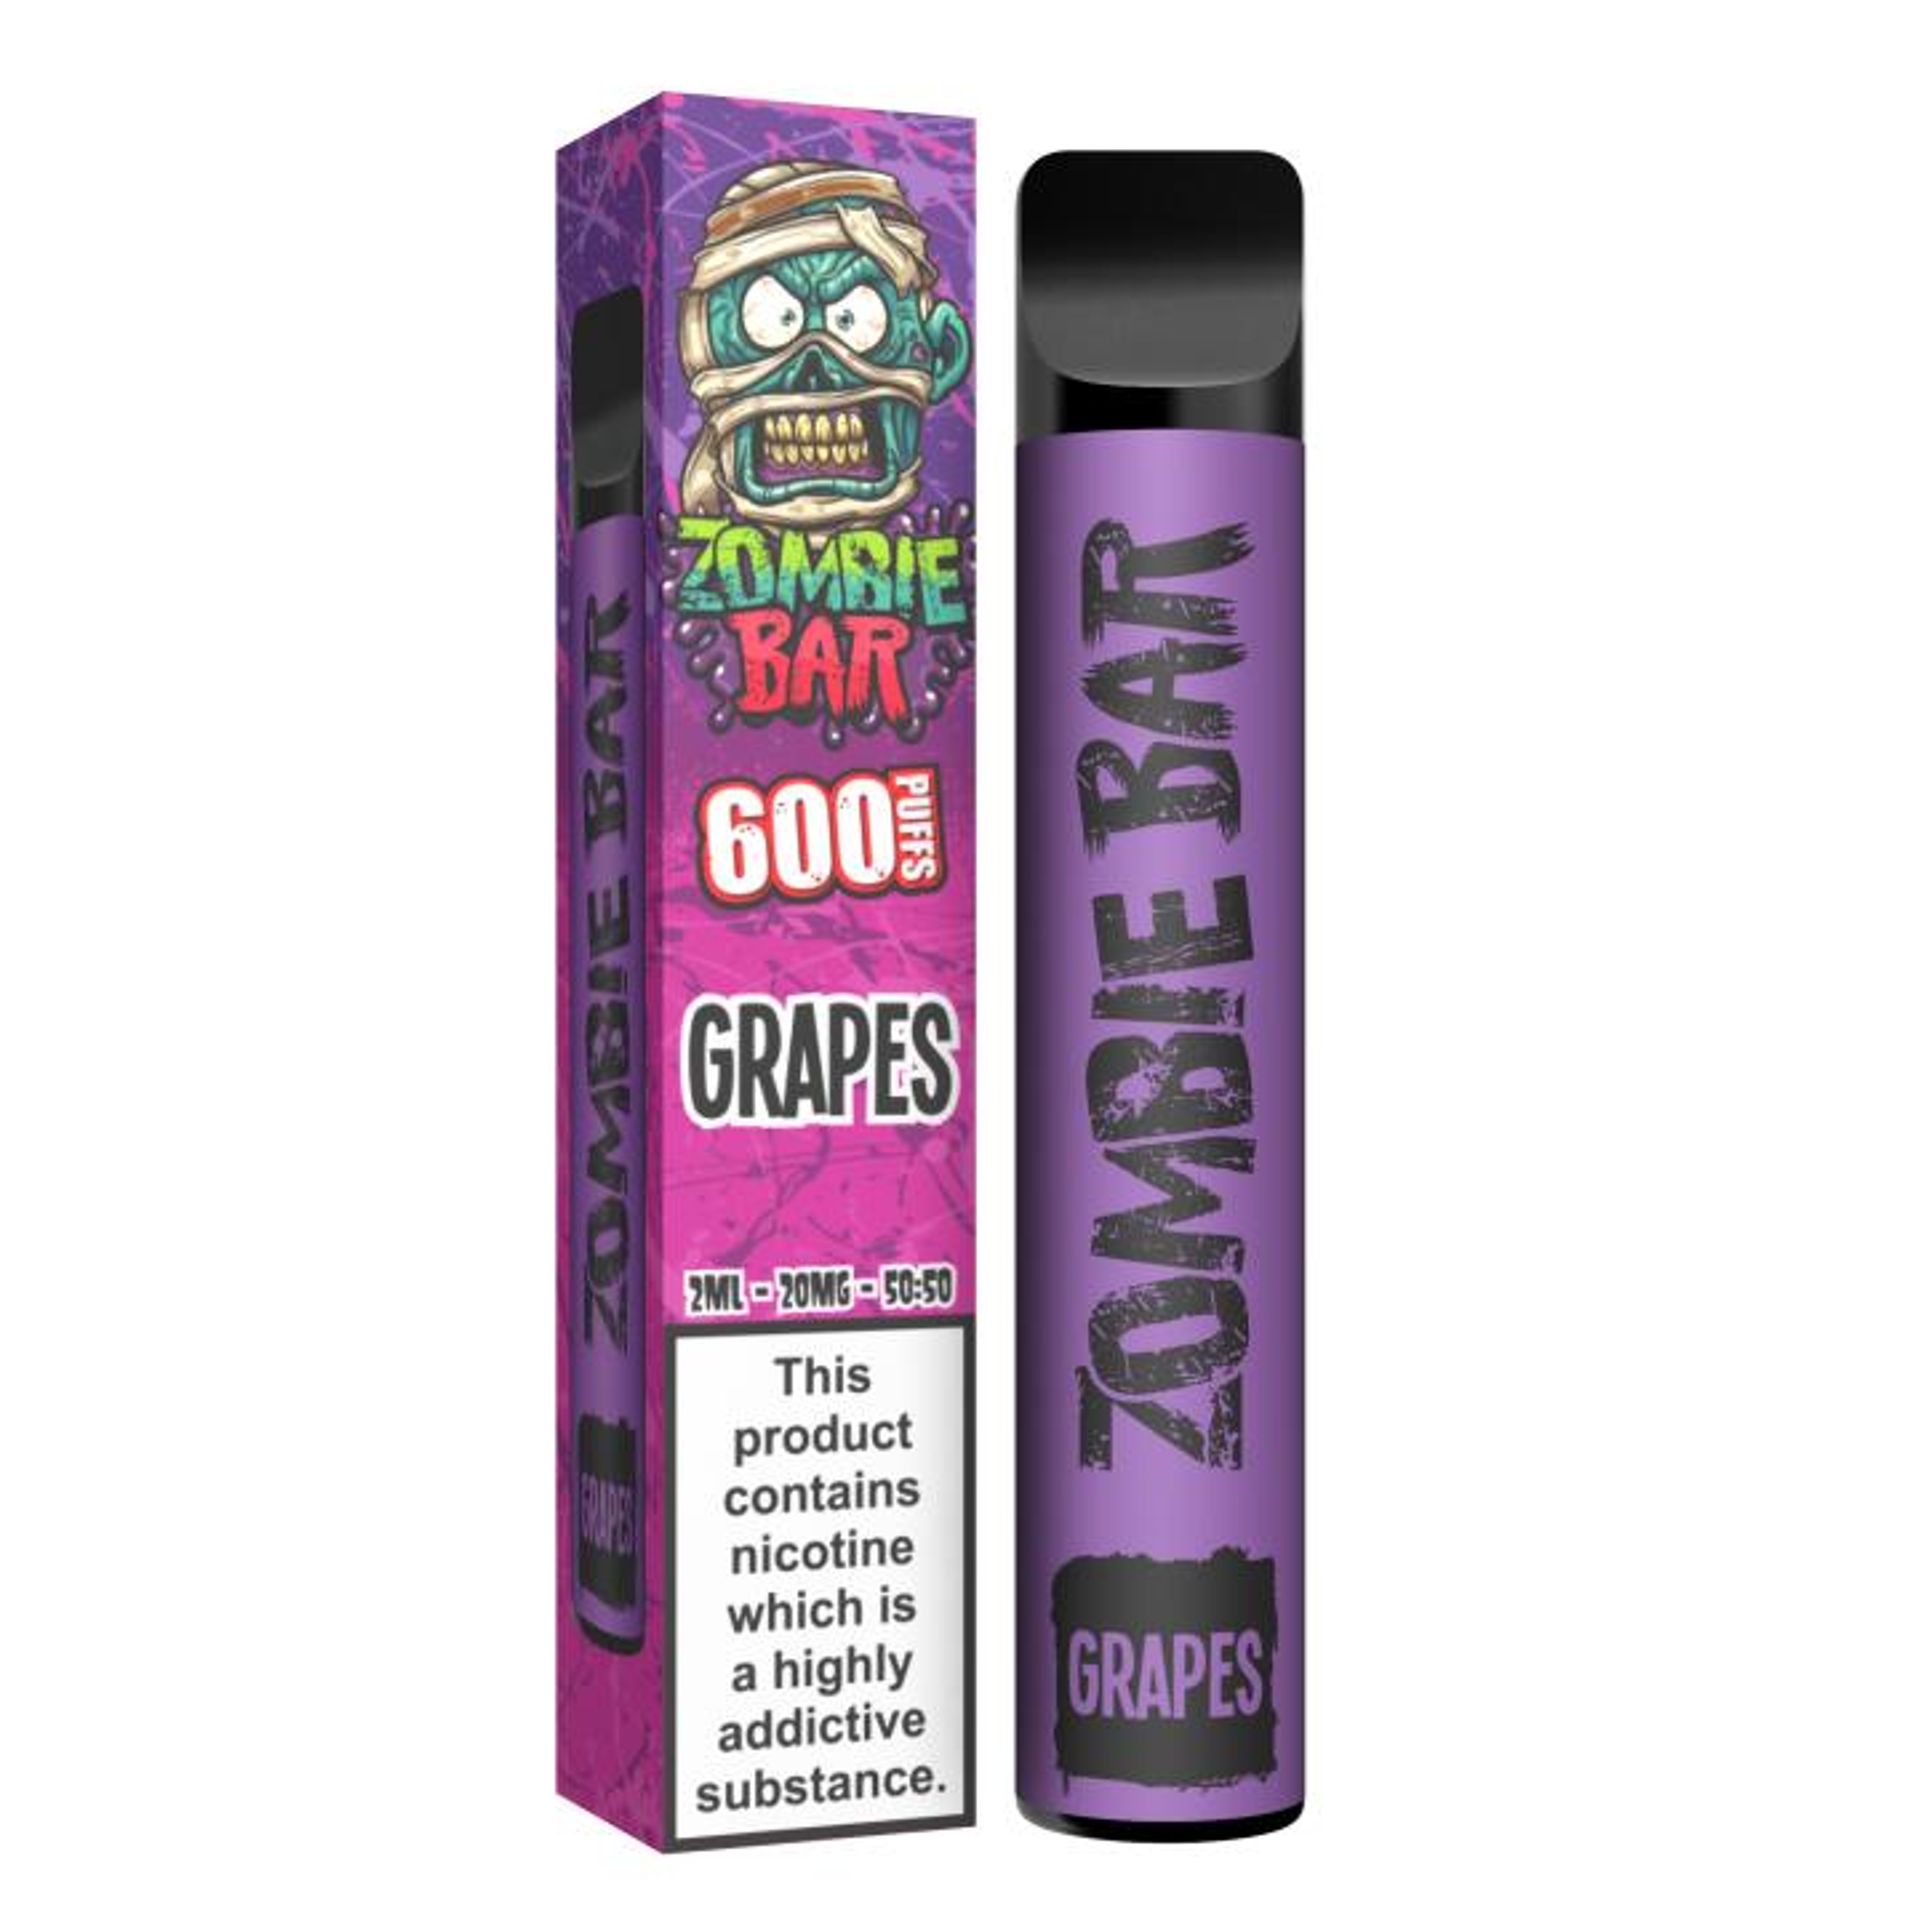 Image of Grapes by Zombie Bar